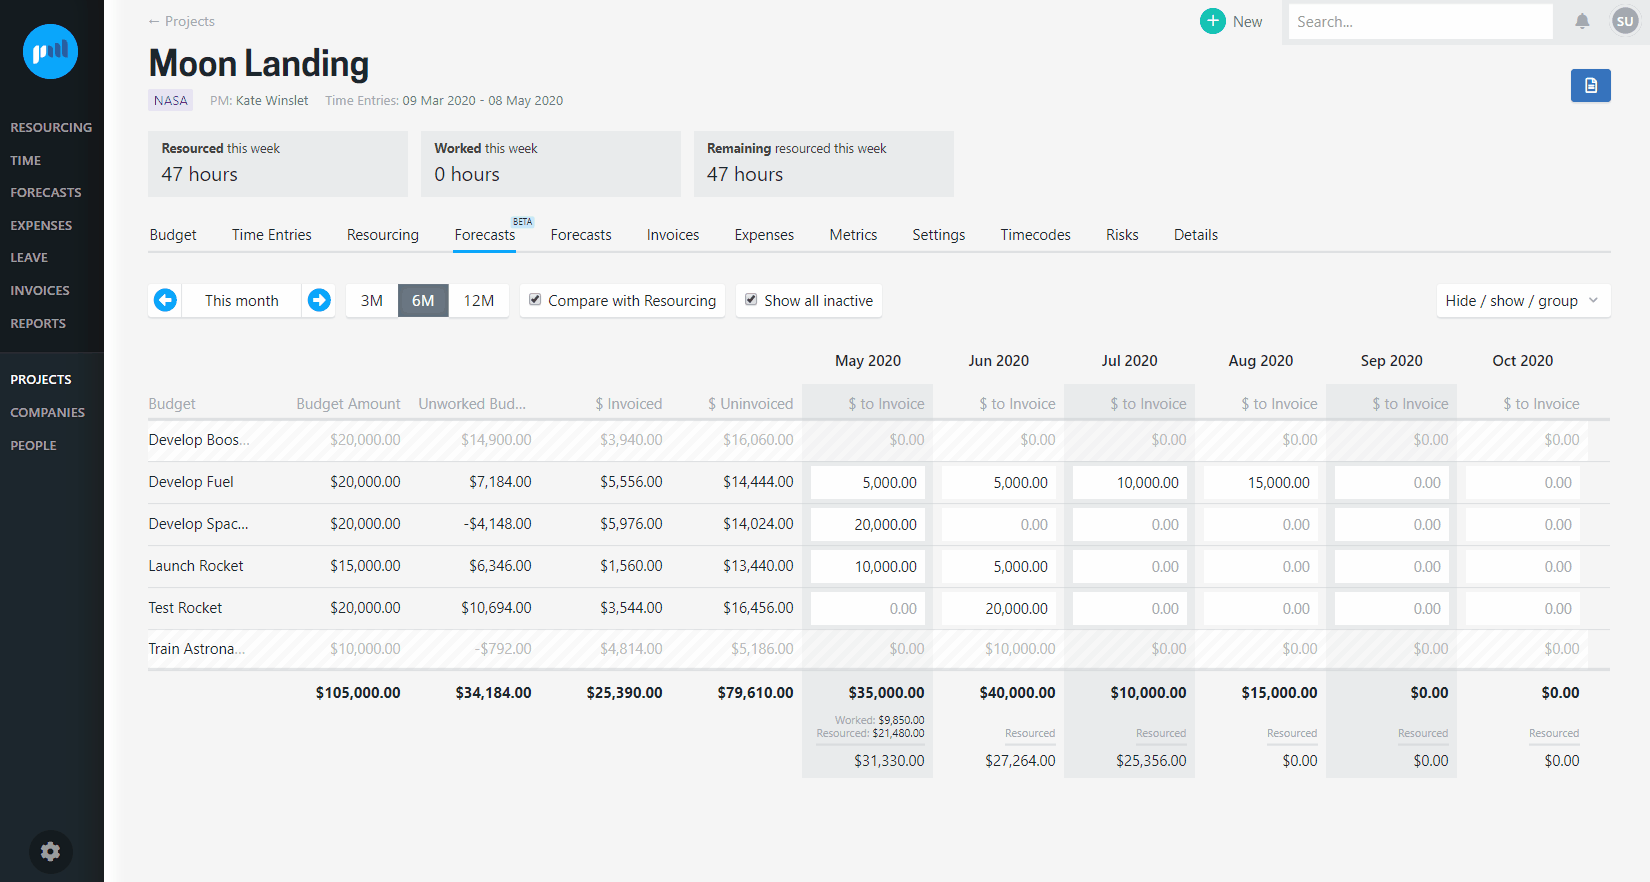 Beta version of project forecasts page